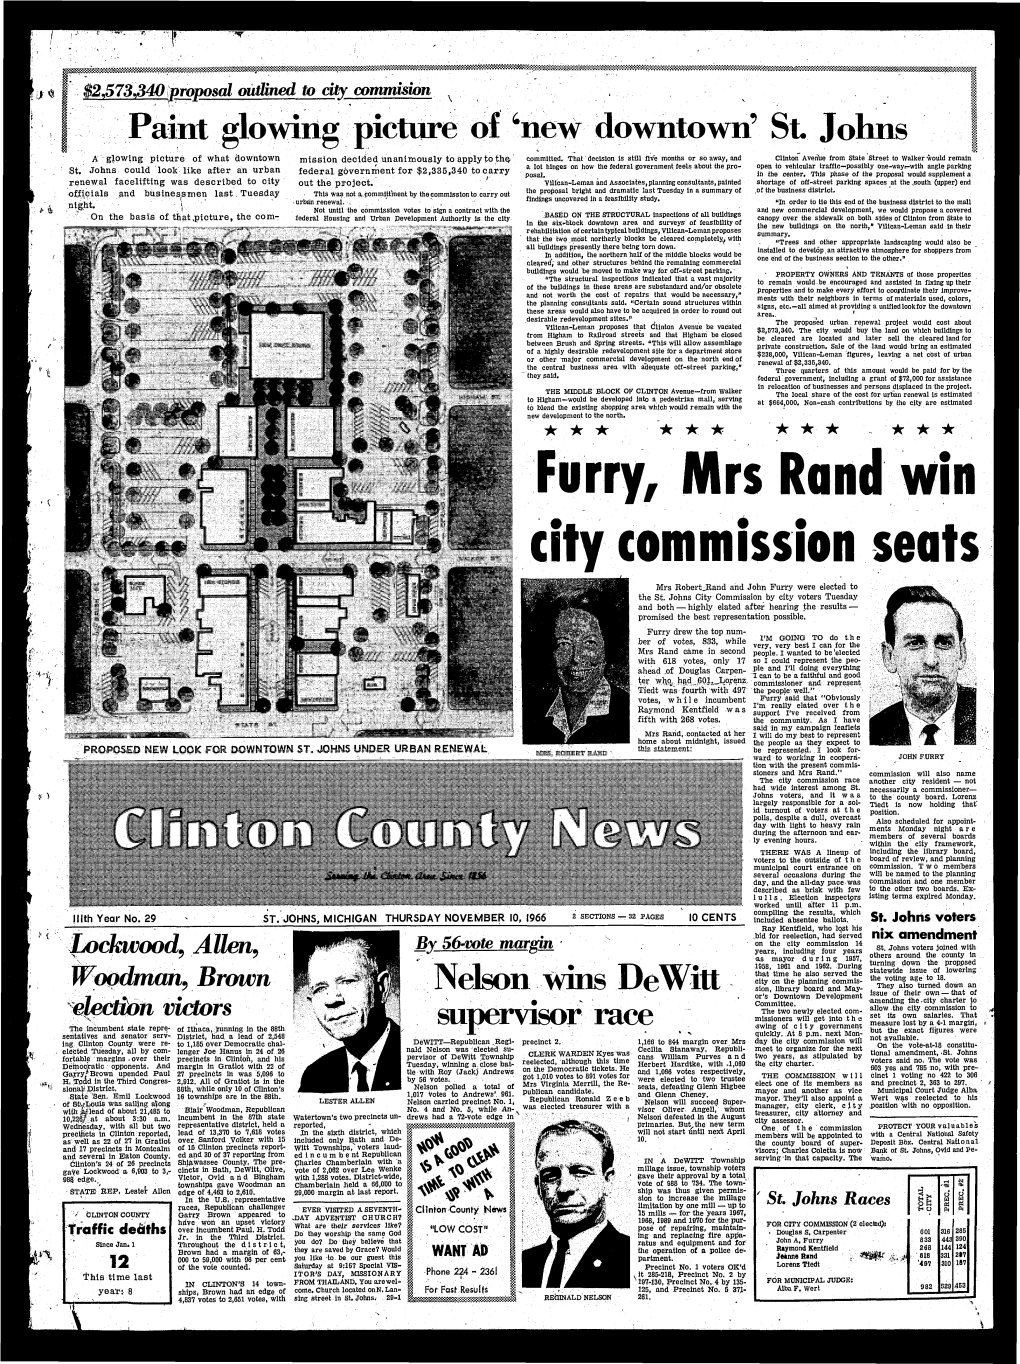 NOVEMBER 10, 1966 SECTIONS-32 PAGES IQ CENTS Included Absentee Ballots